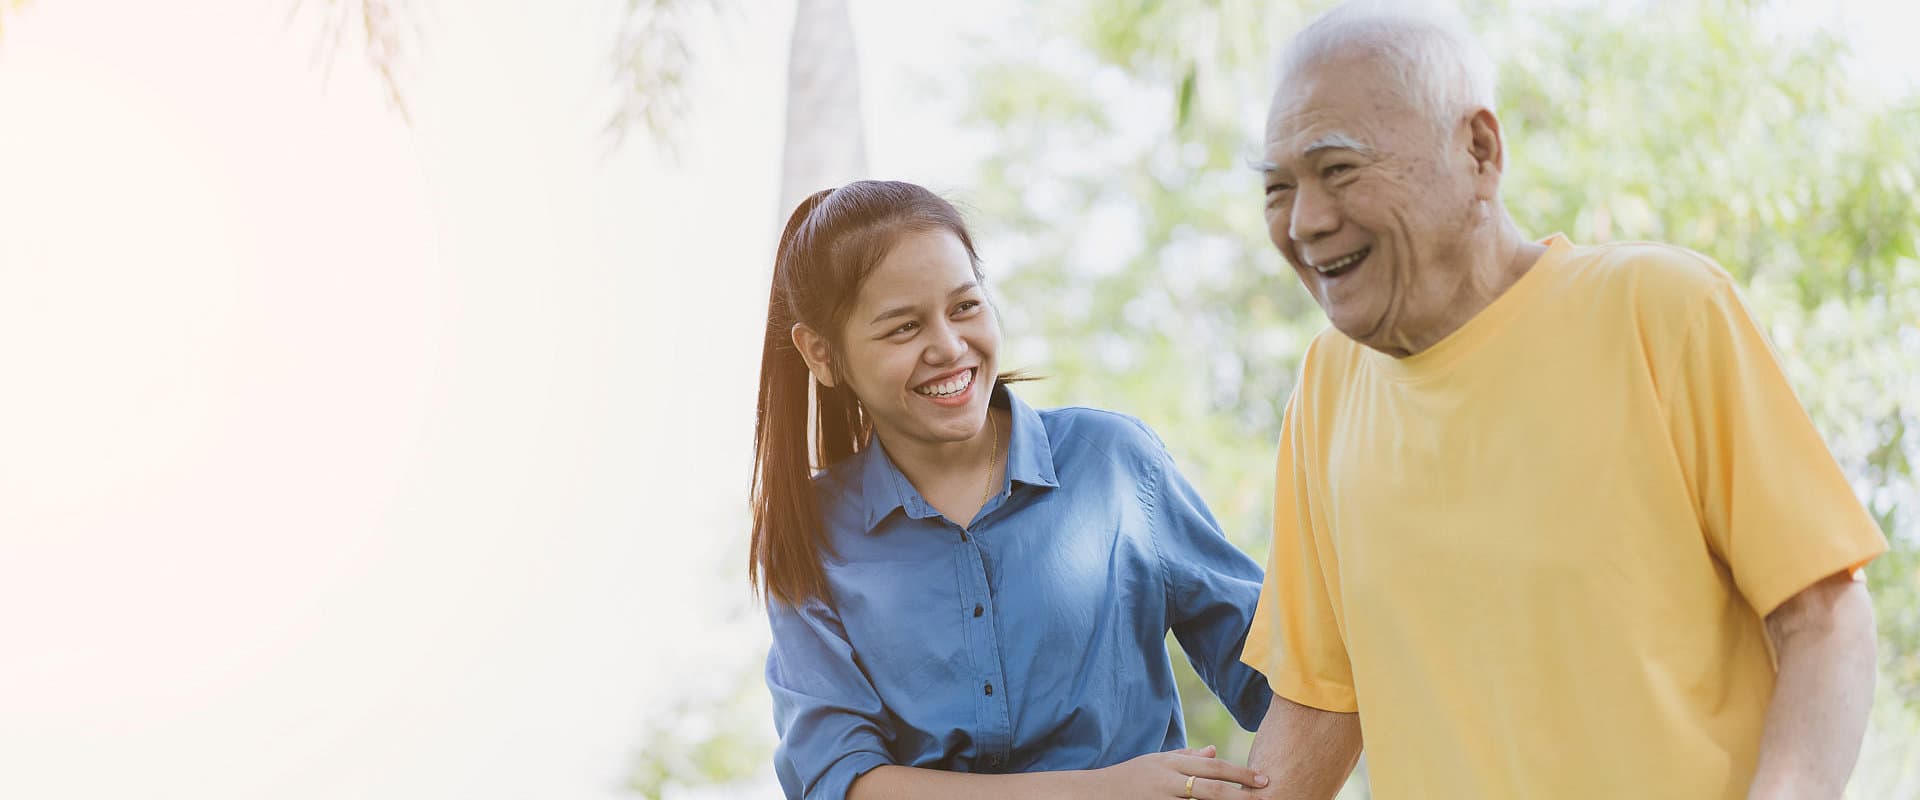 elderly man and caregiver woman smiling